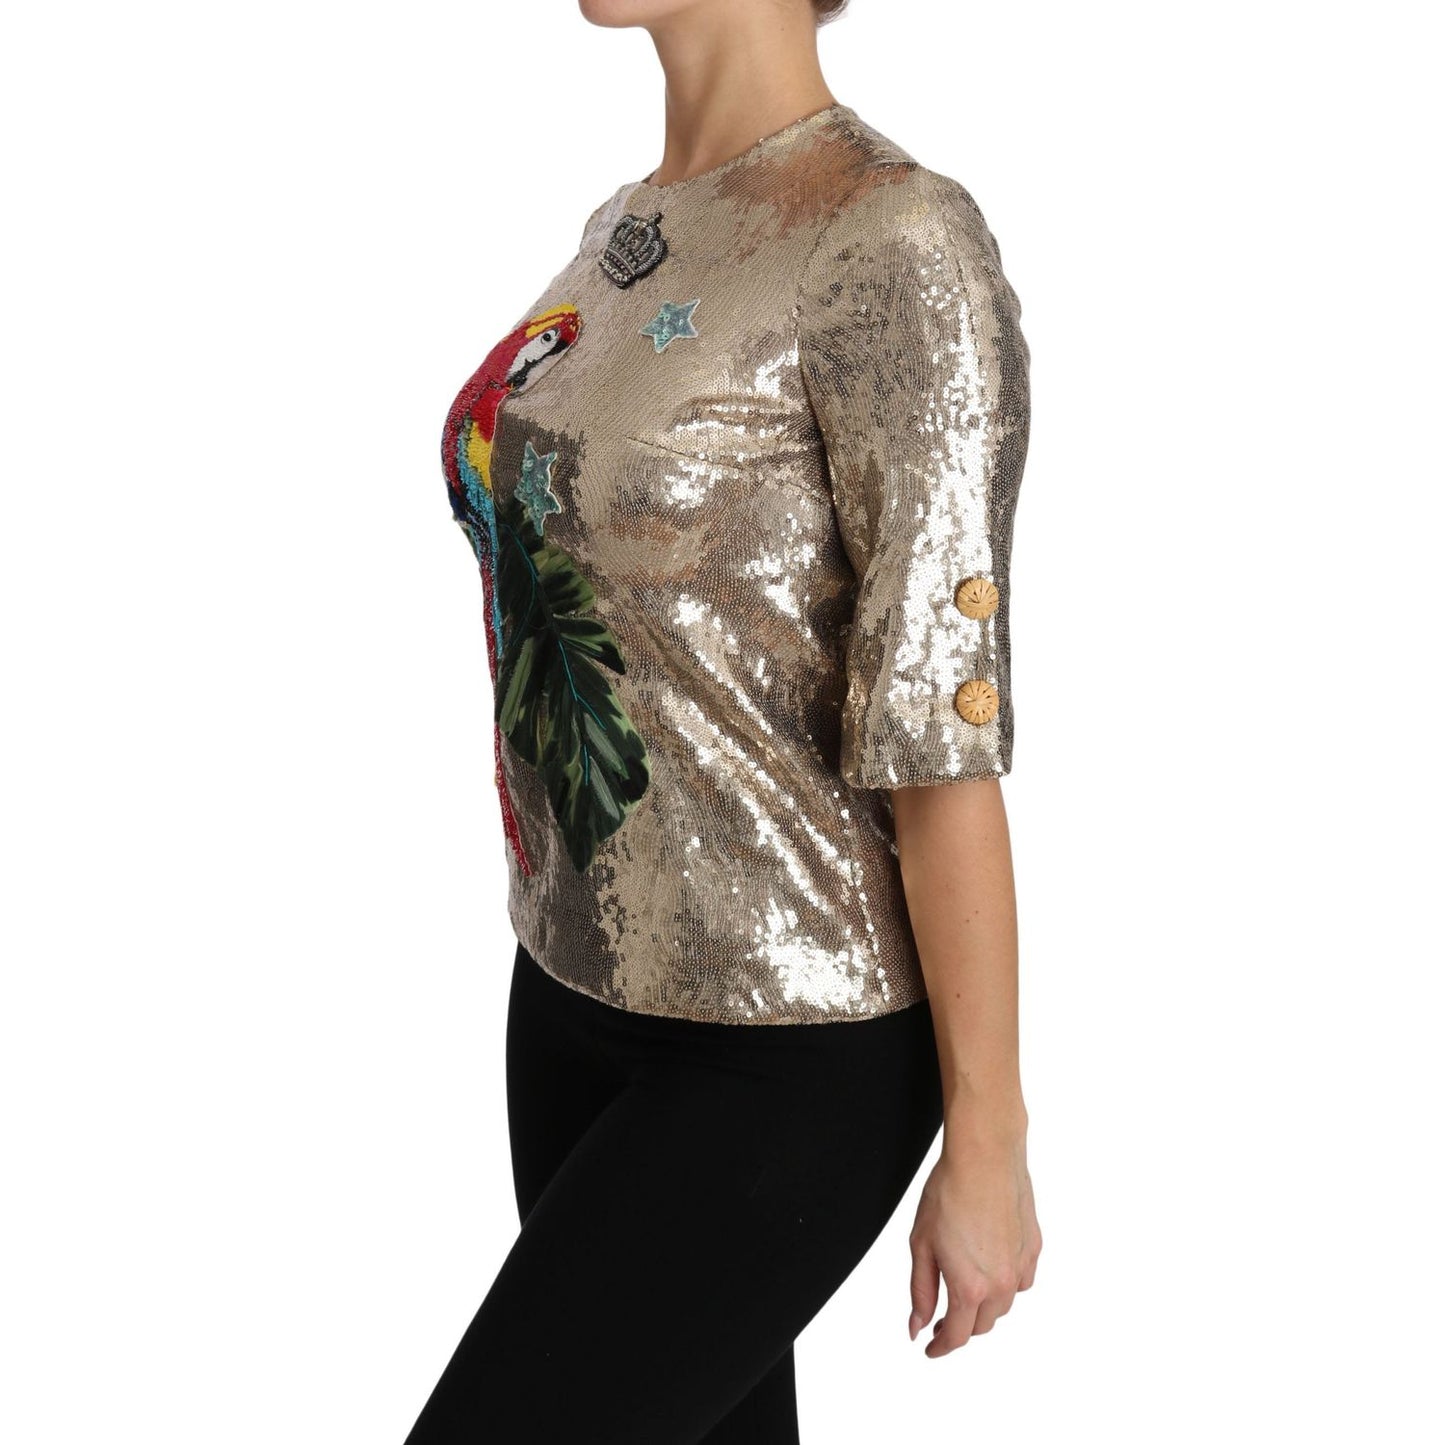 Dolce & Gabbana Gold Parrot Motif Crewneck Blouse with Crystals gold-sequined-parrot-crystal-blouse 654059-gold-sequined-parrot-crystal-blouse-5.jpg